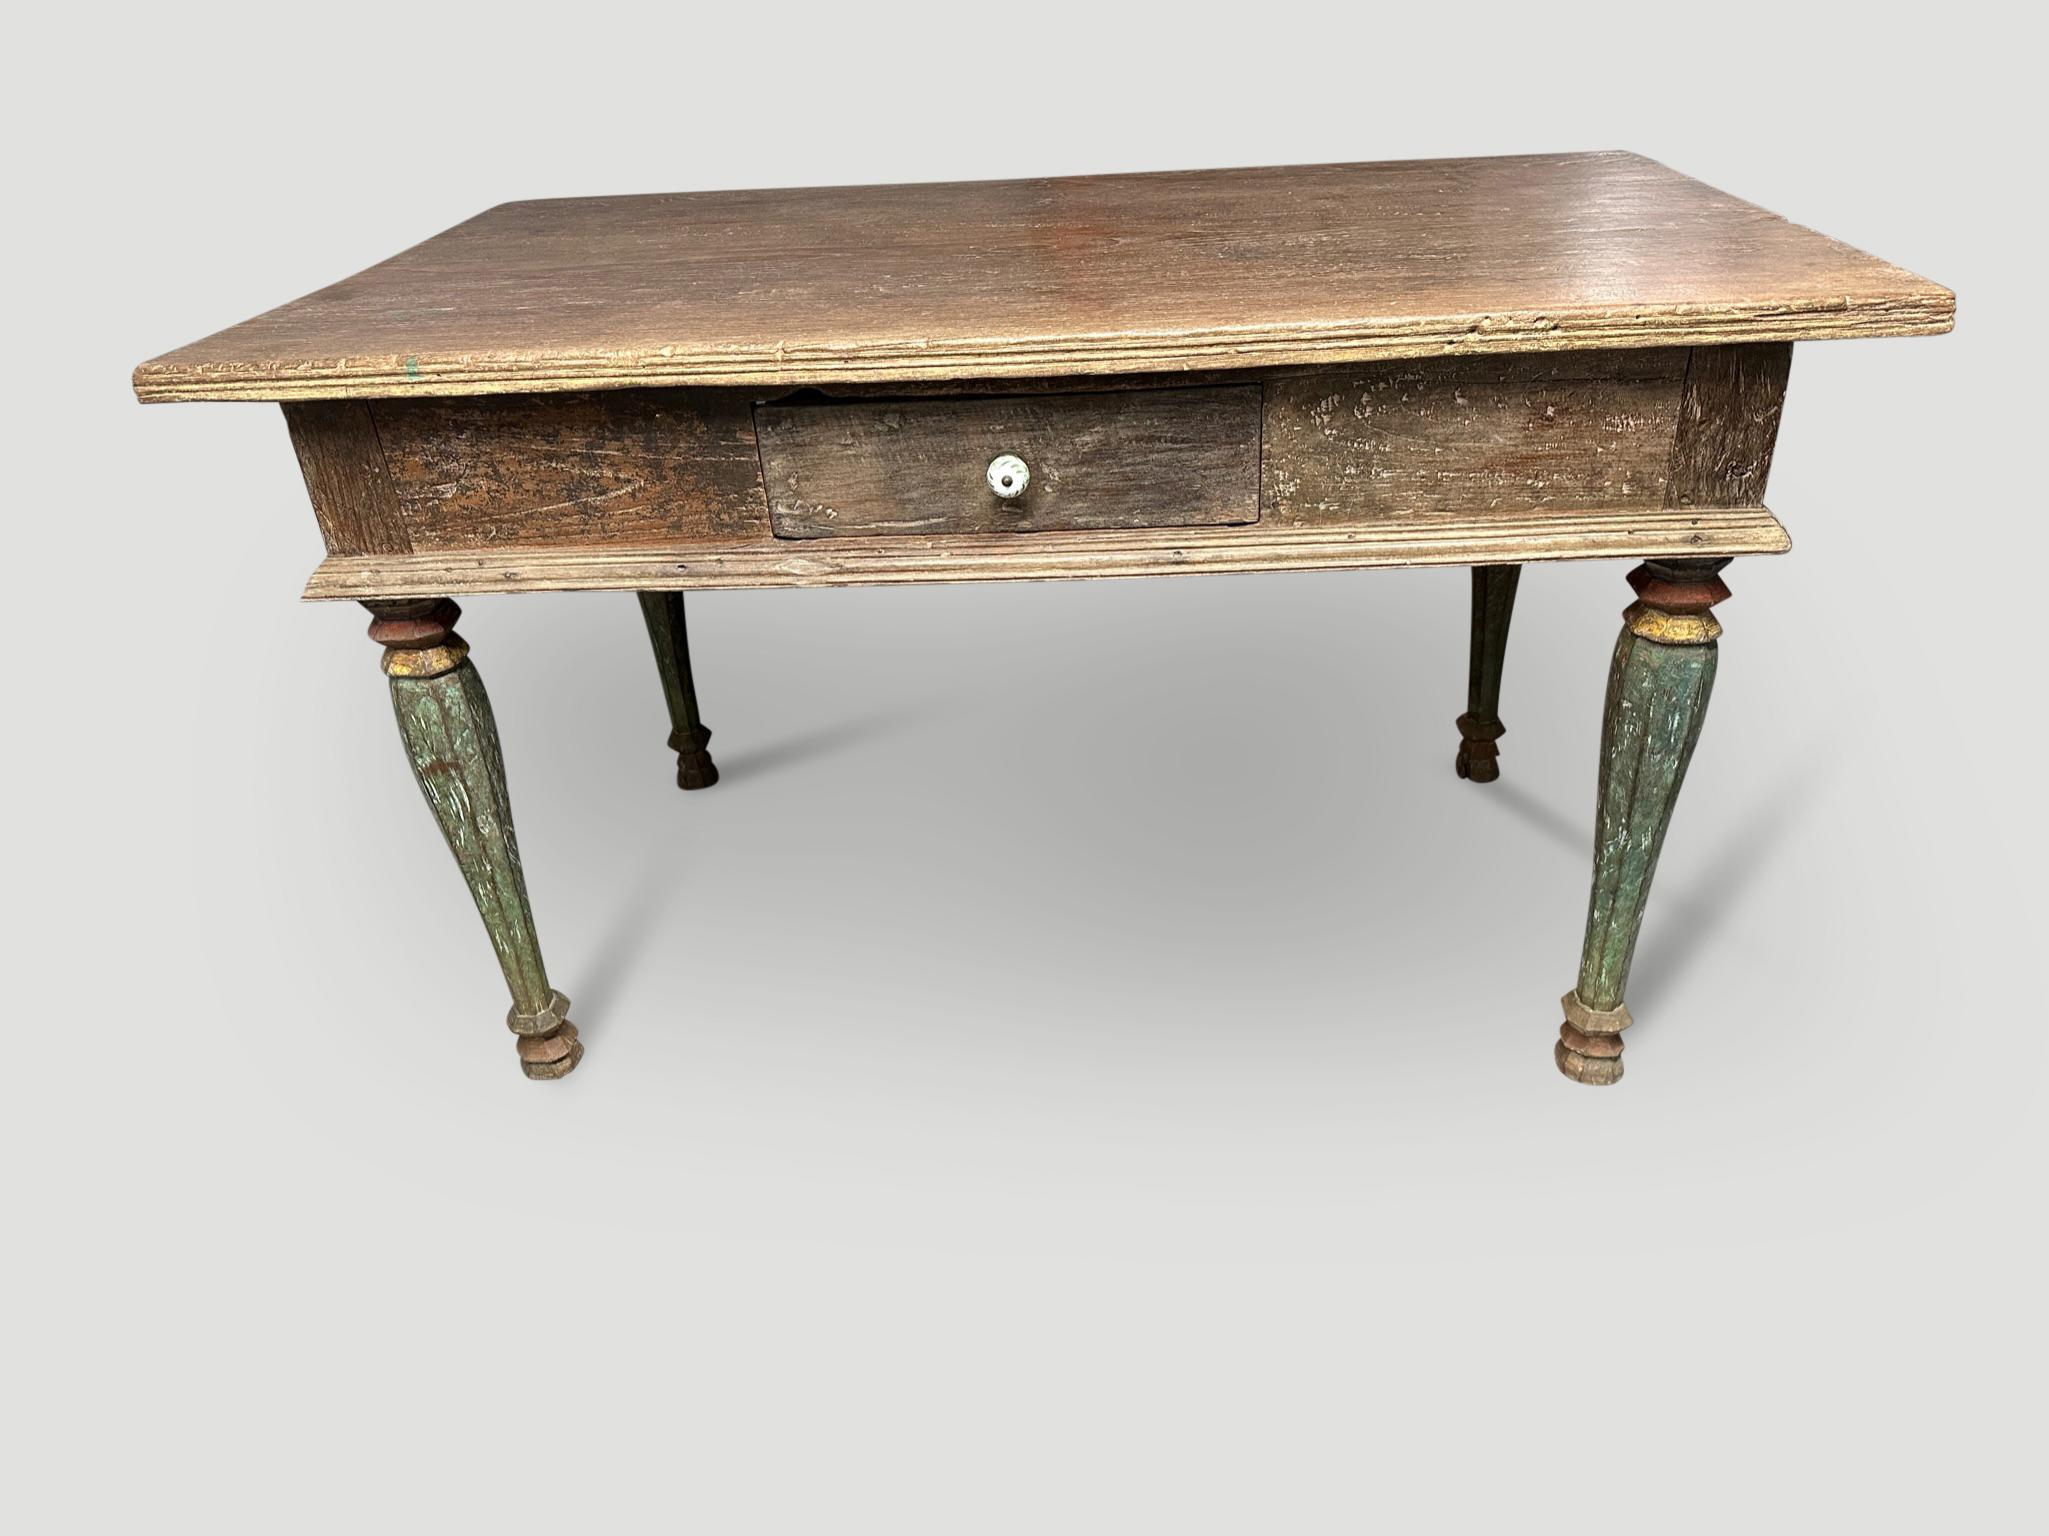 Antique colonial desk or console. The patina on this teak wood is beautiful. Hand carved legs with the original remnants of color and beautiful carving around the side, make this a special piece. This desk or console has been restored to its